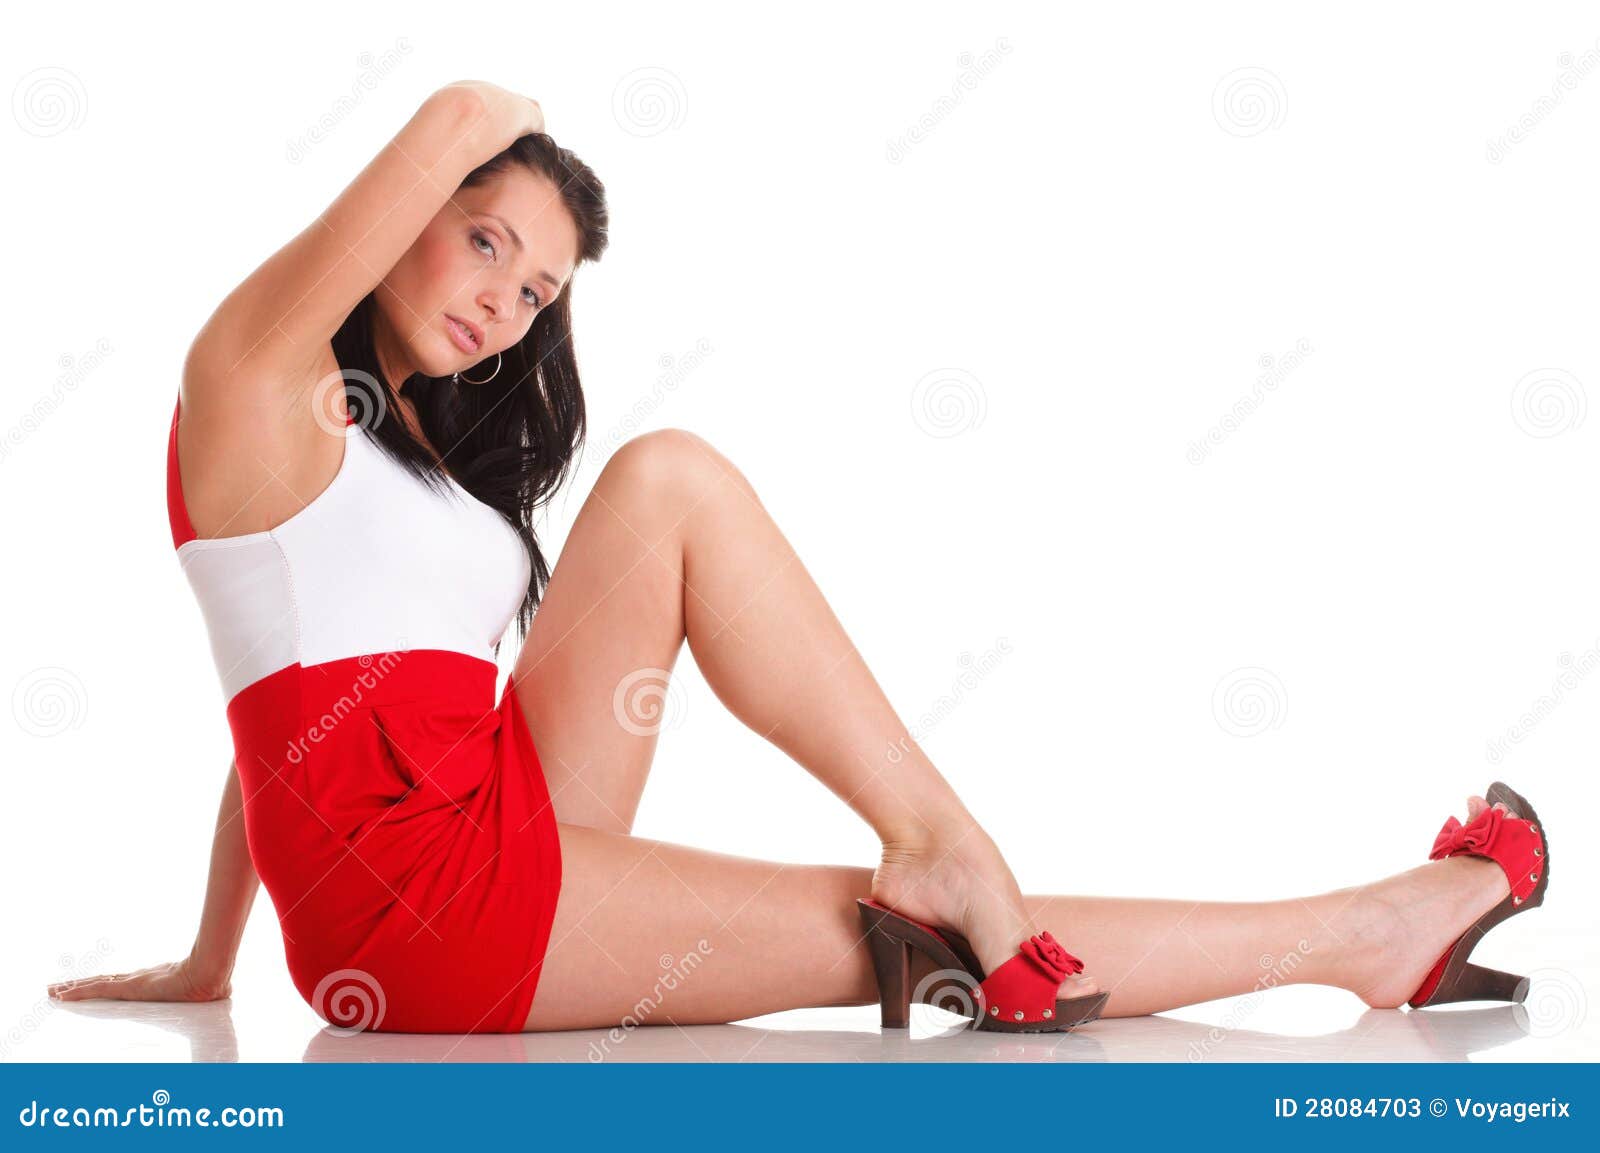 Woman In Red Lying Down On The Floor Stock Image Image of happy, copy 28084703